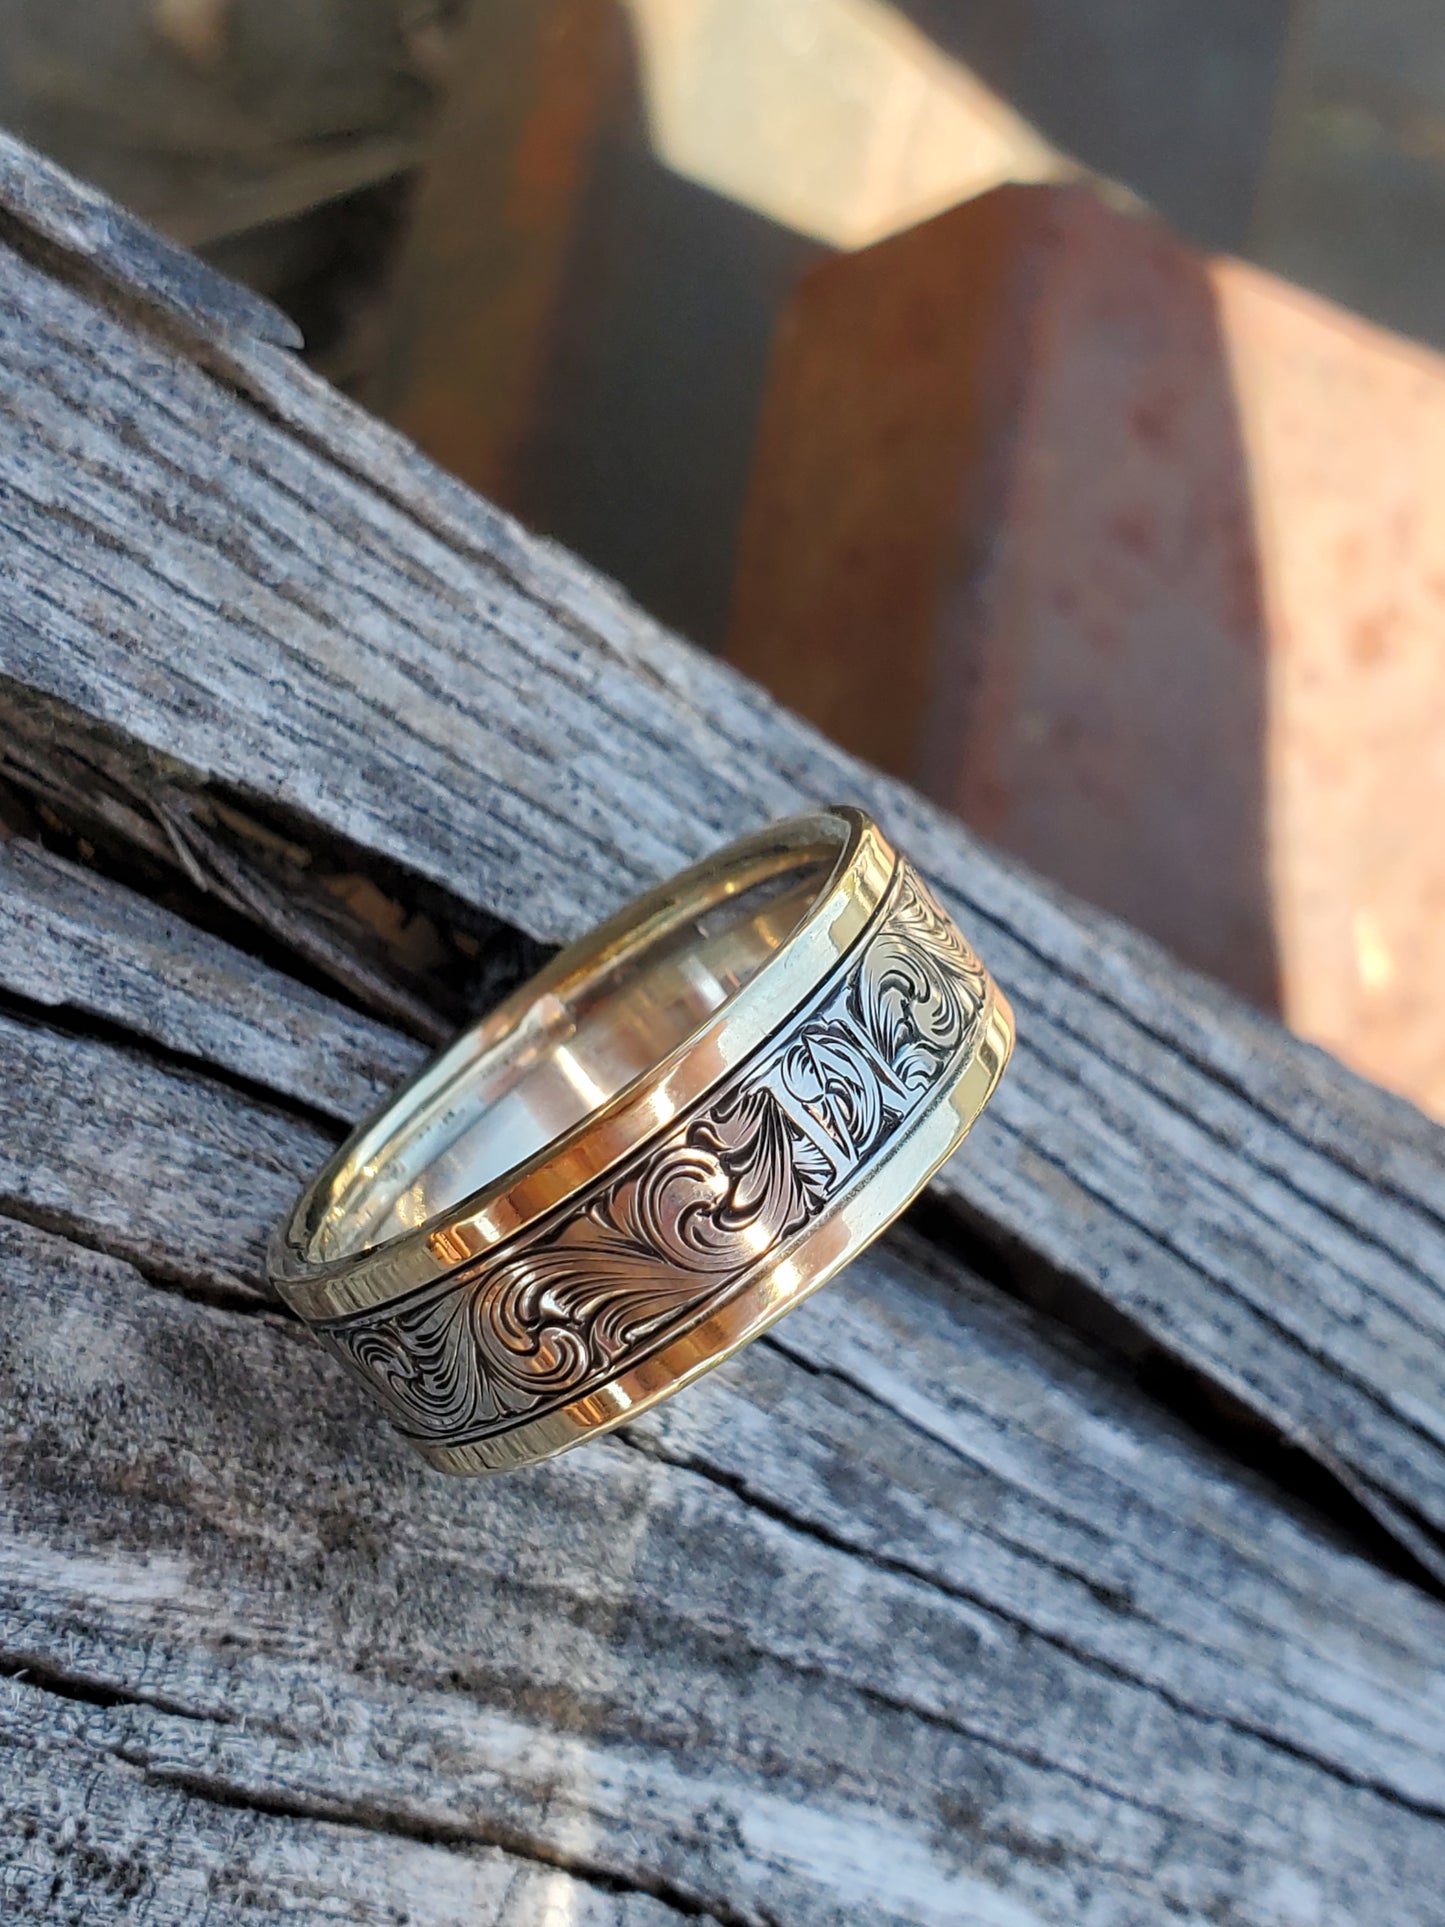 The Milo: 10K White and Yellow Gold Men's Western Wedding Band, Custom Engraved Initial, Hand-Engraved Cowboy Wedding Ring, Men's Engraved Wedding Band, 10mm Wedding Band for Men, Two-tone Men's Ring